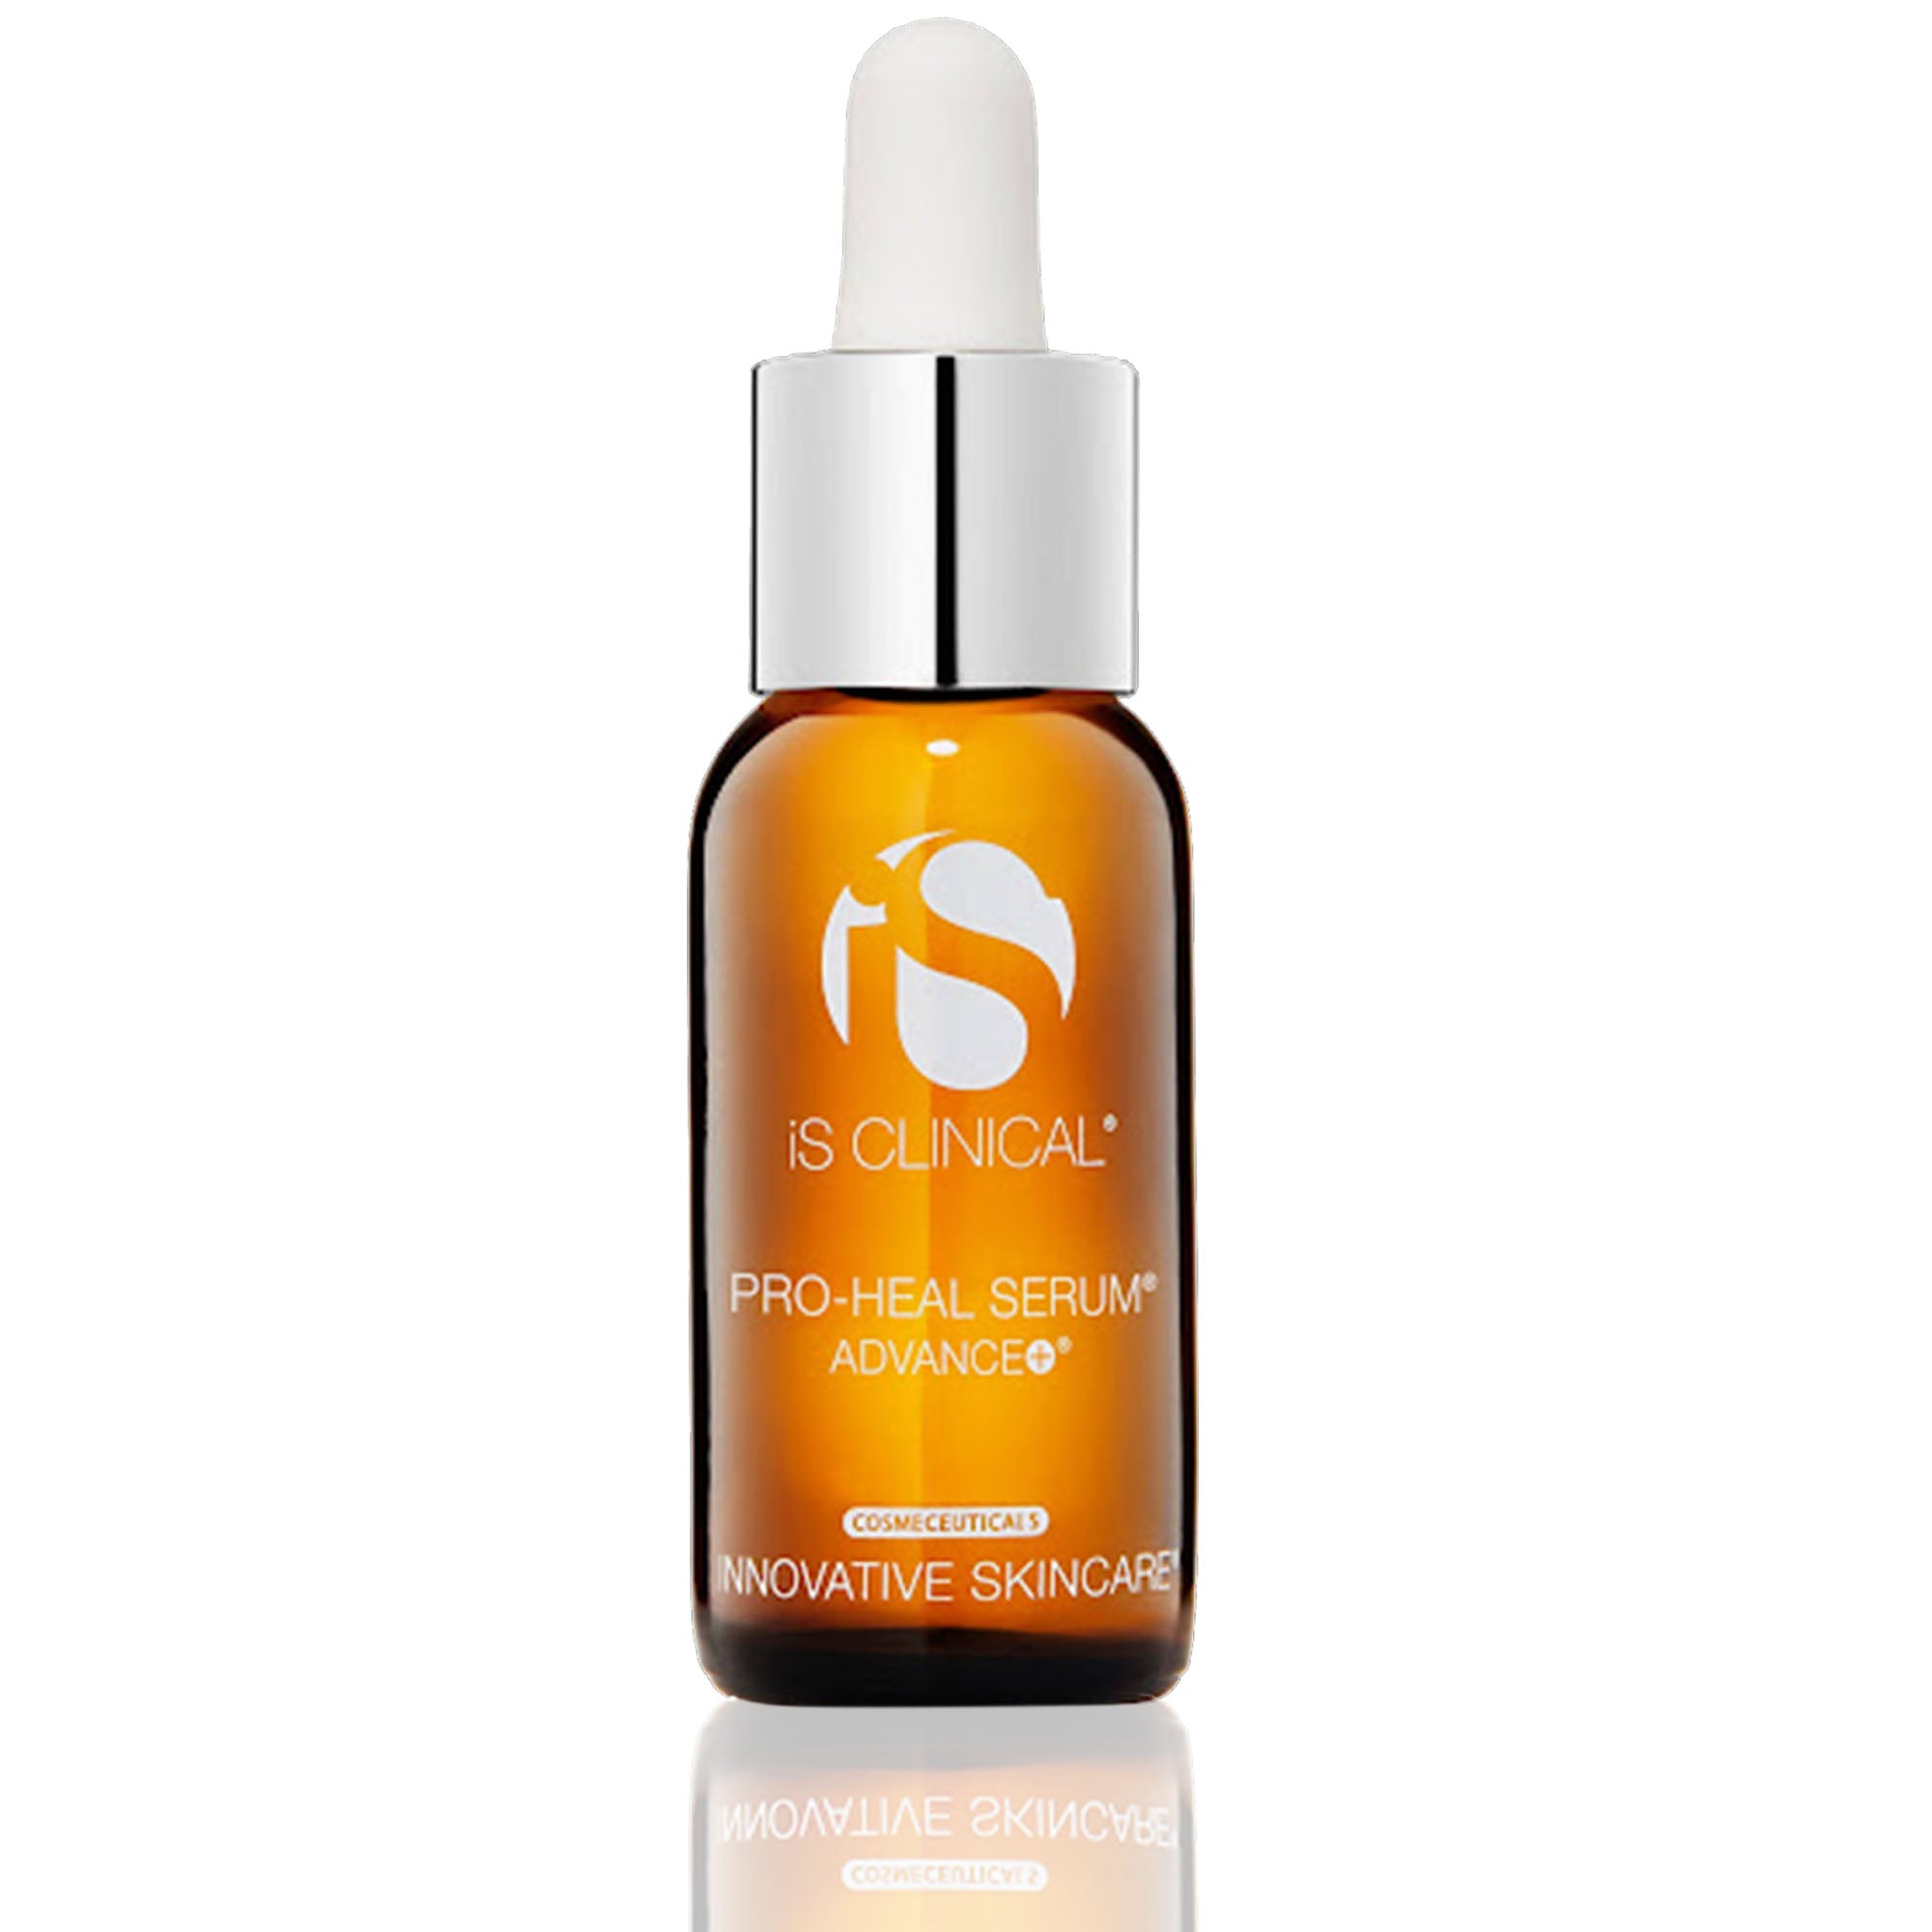 iS CLINICAL Highly Effective Defense Serum | PRO-HEAL® SERUM ADVANCE+® 60ml